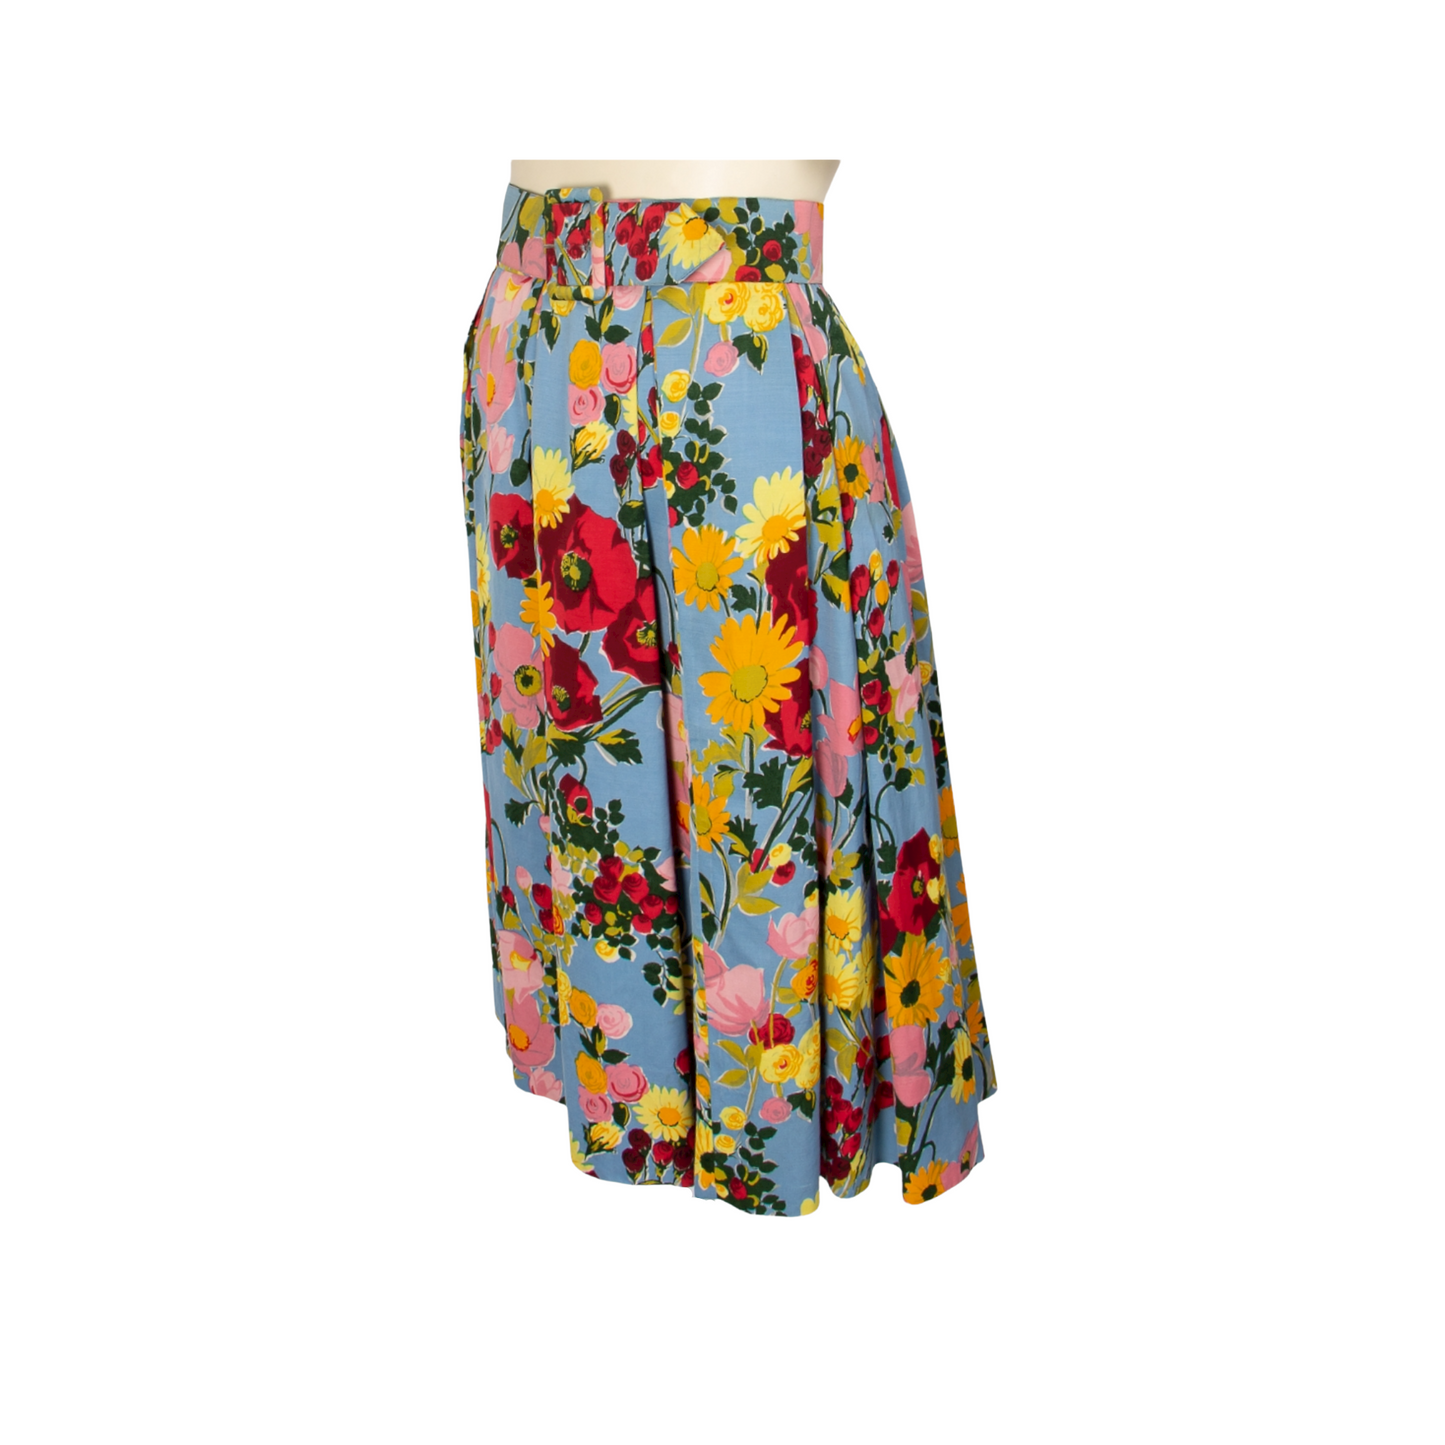 UNKNOWN Skirts vintage Lysis Paris pre-owned secondhand